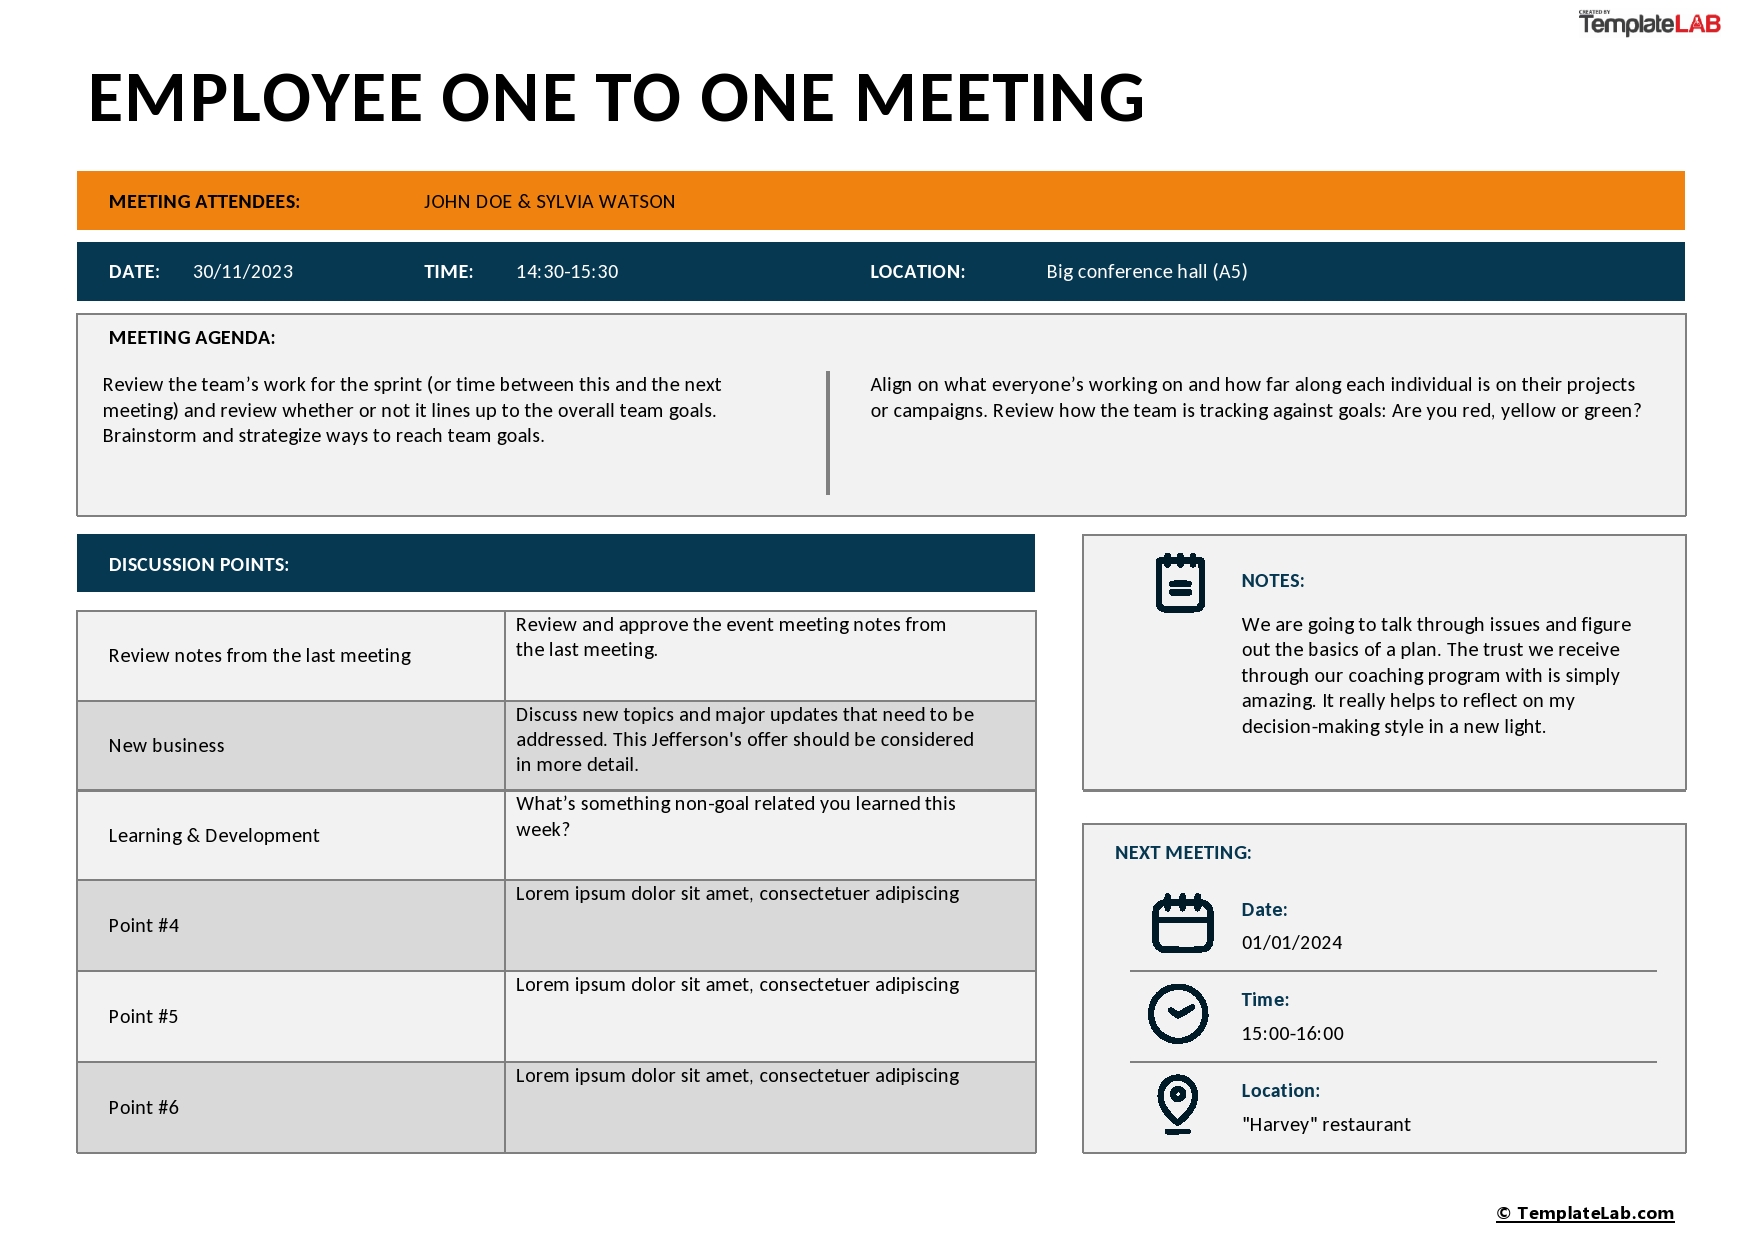 Free Employee One to One Meeting Template